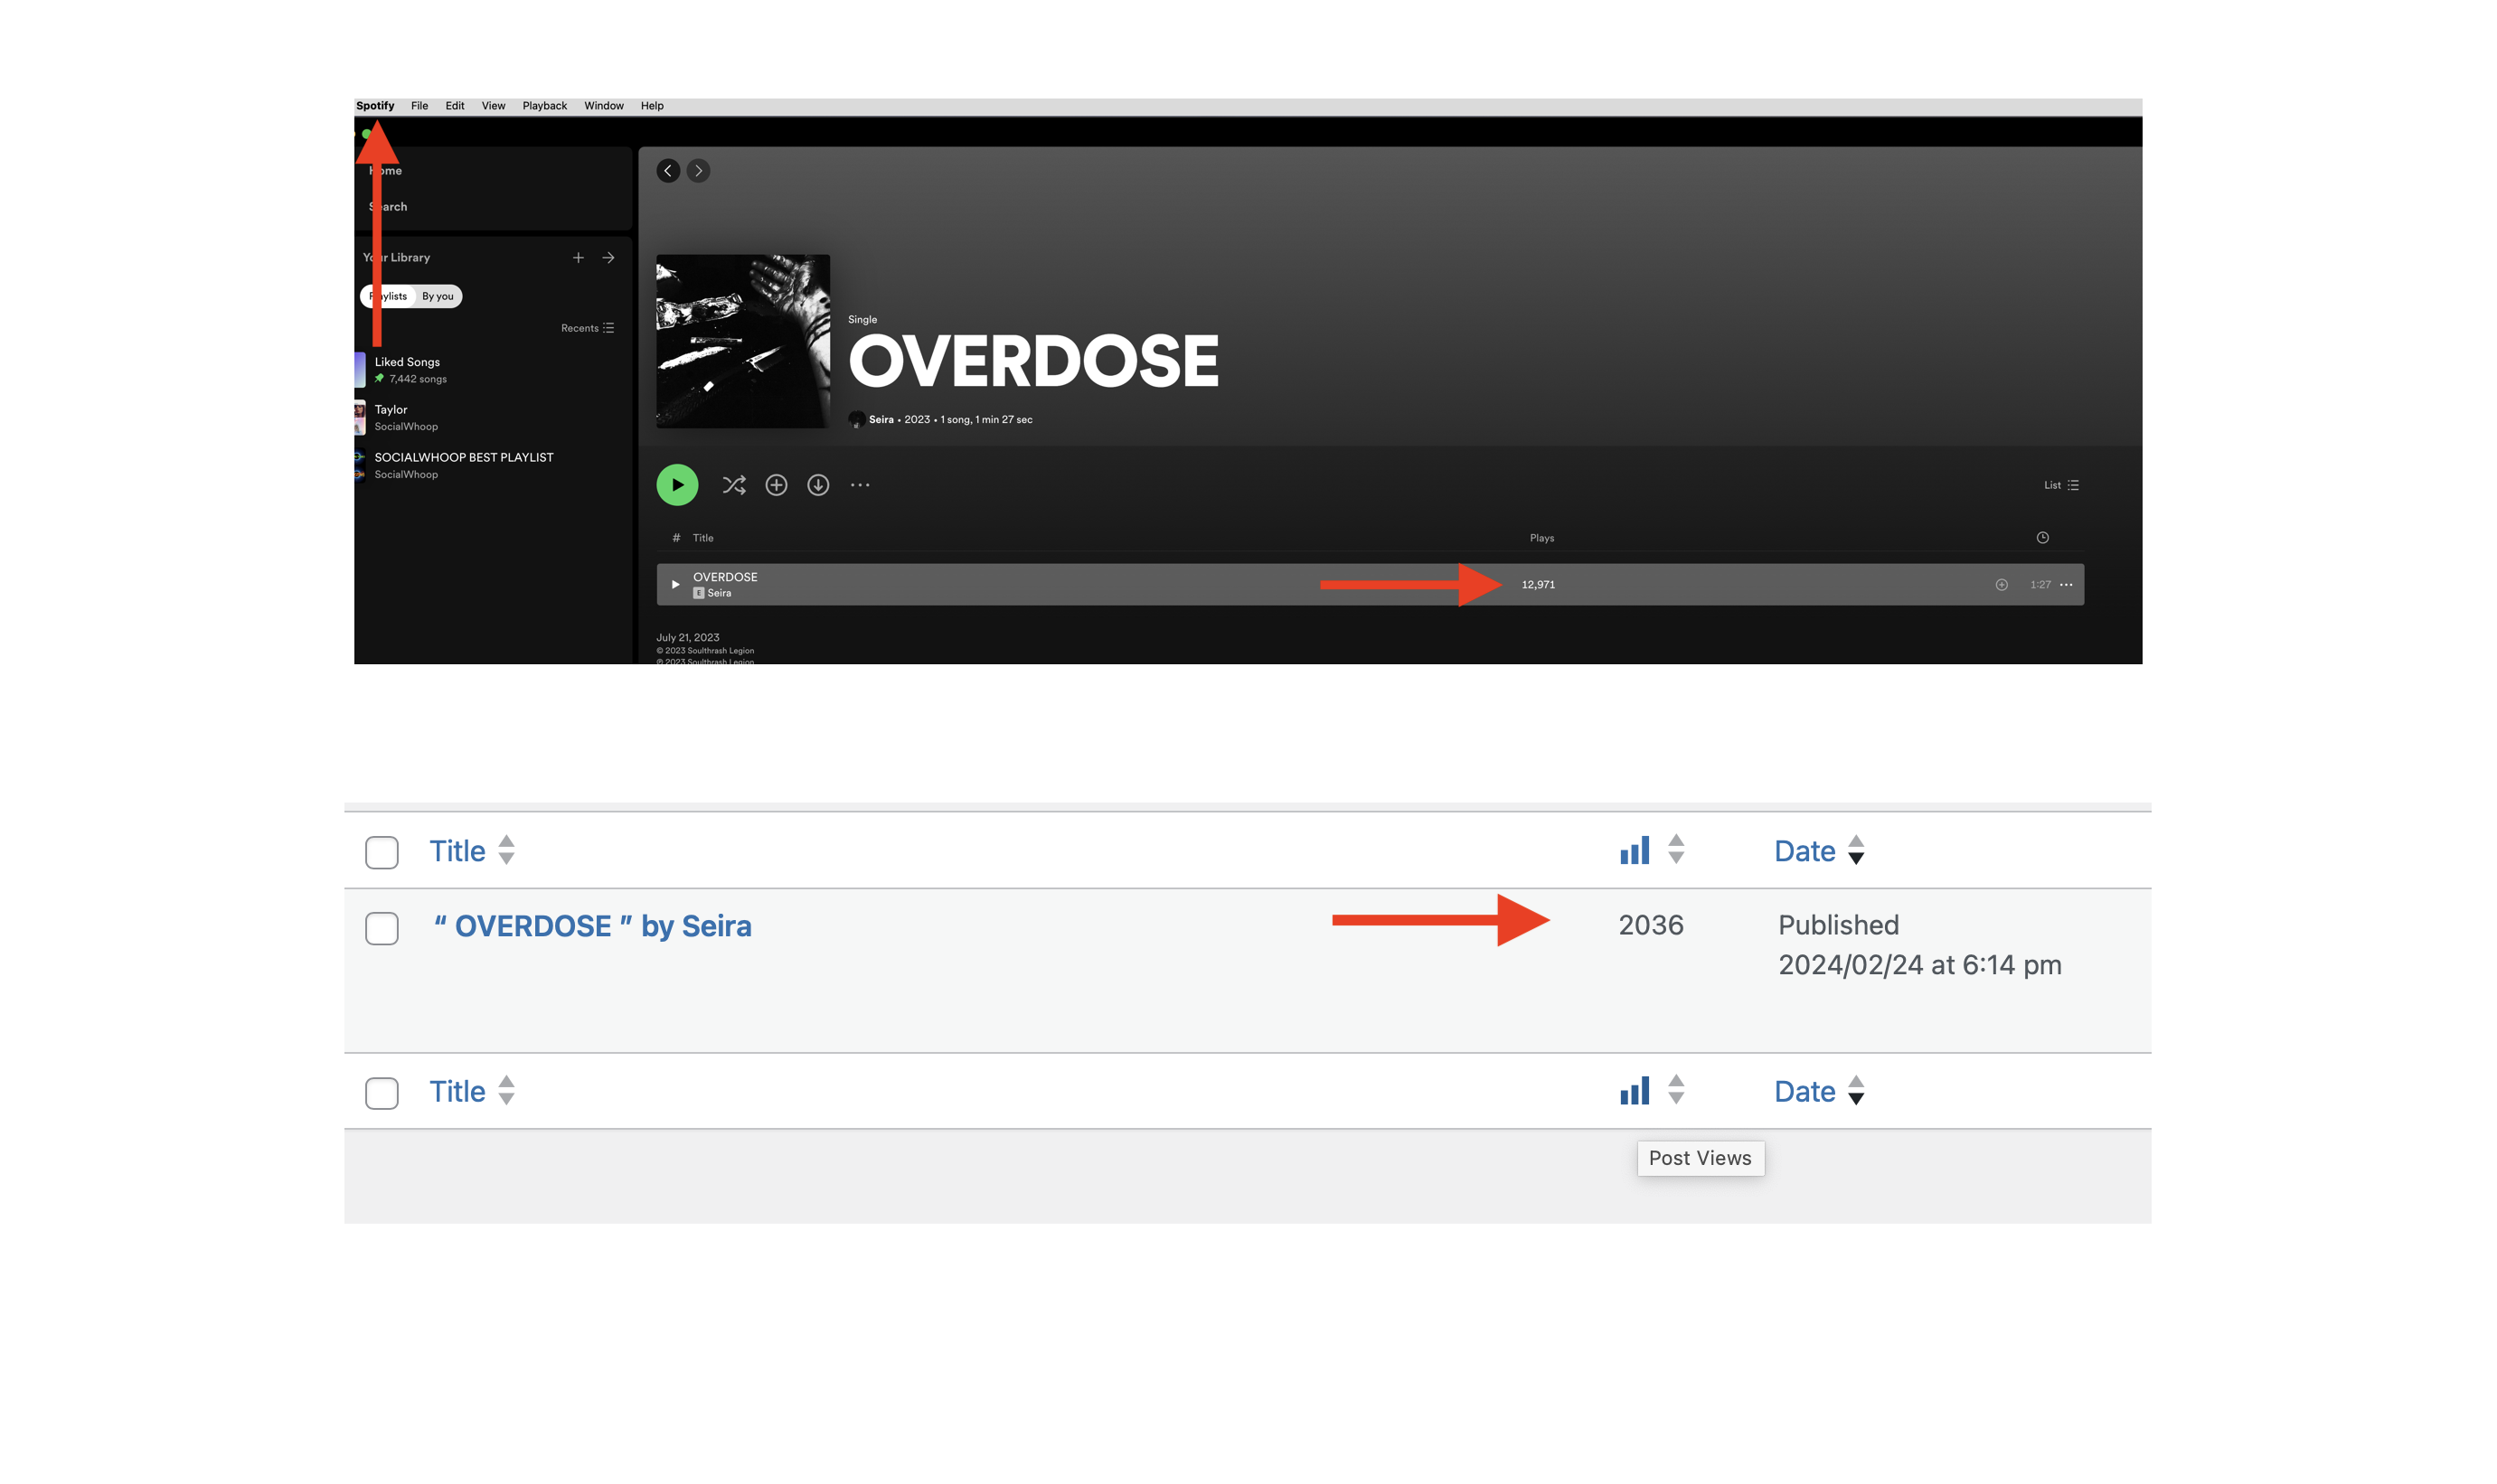 “ OVERDOSE ” by Seira ( results from our service )